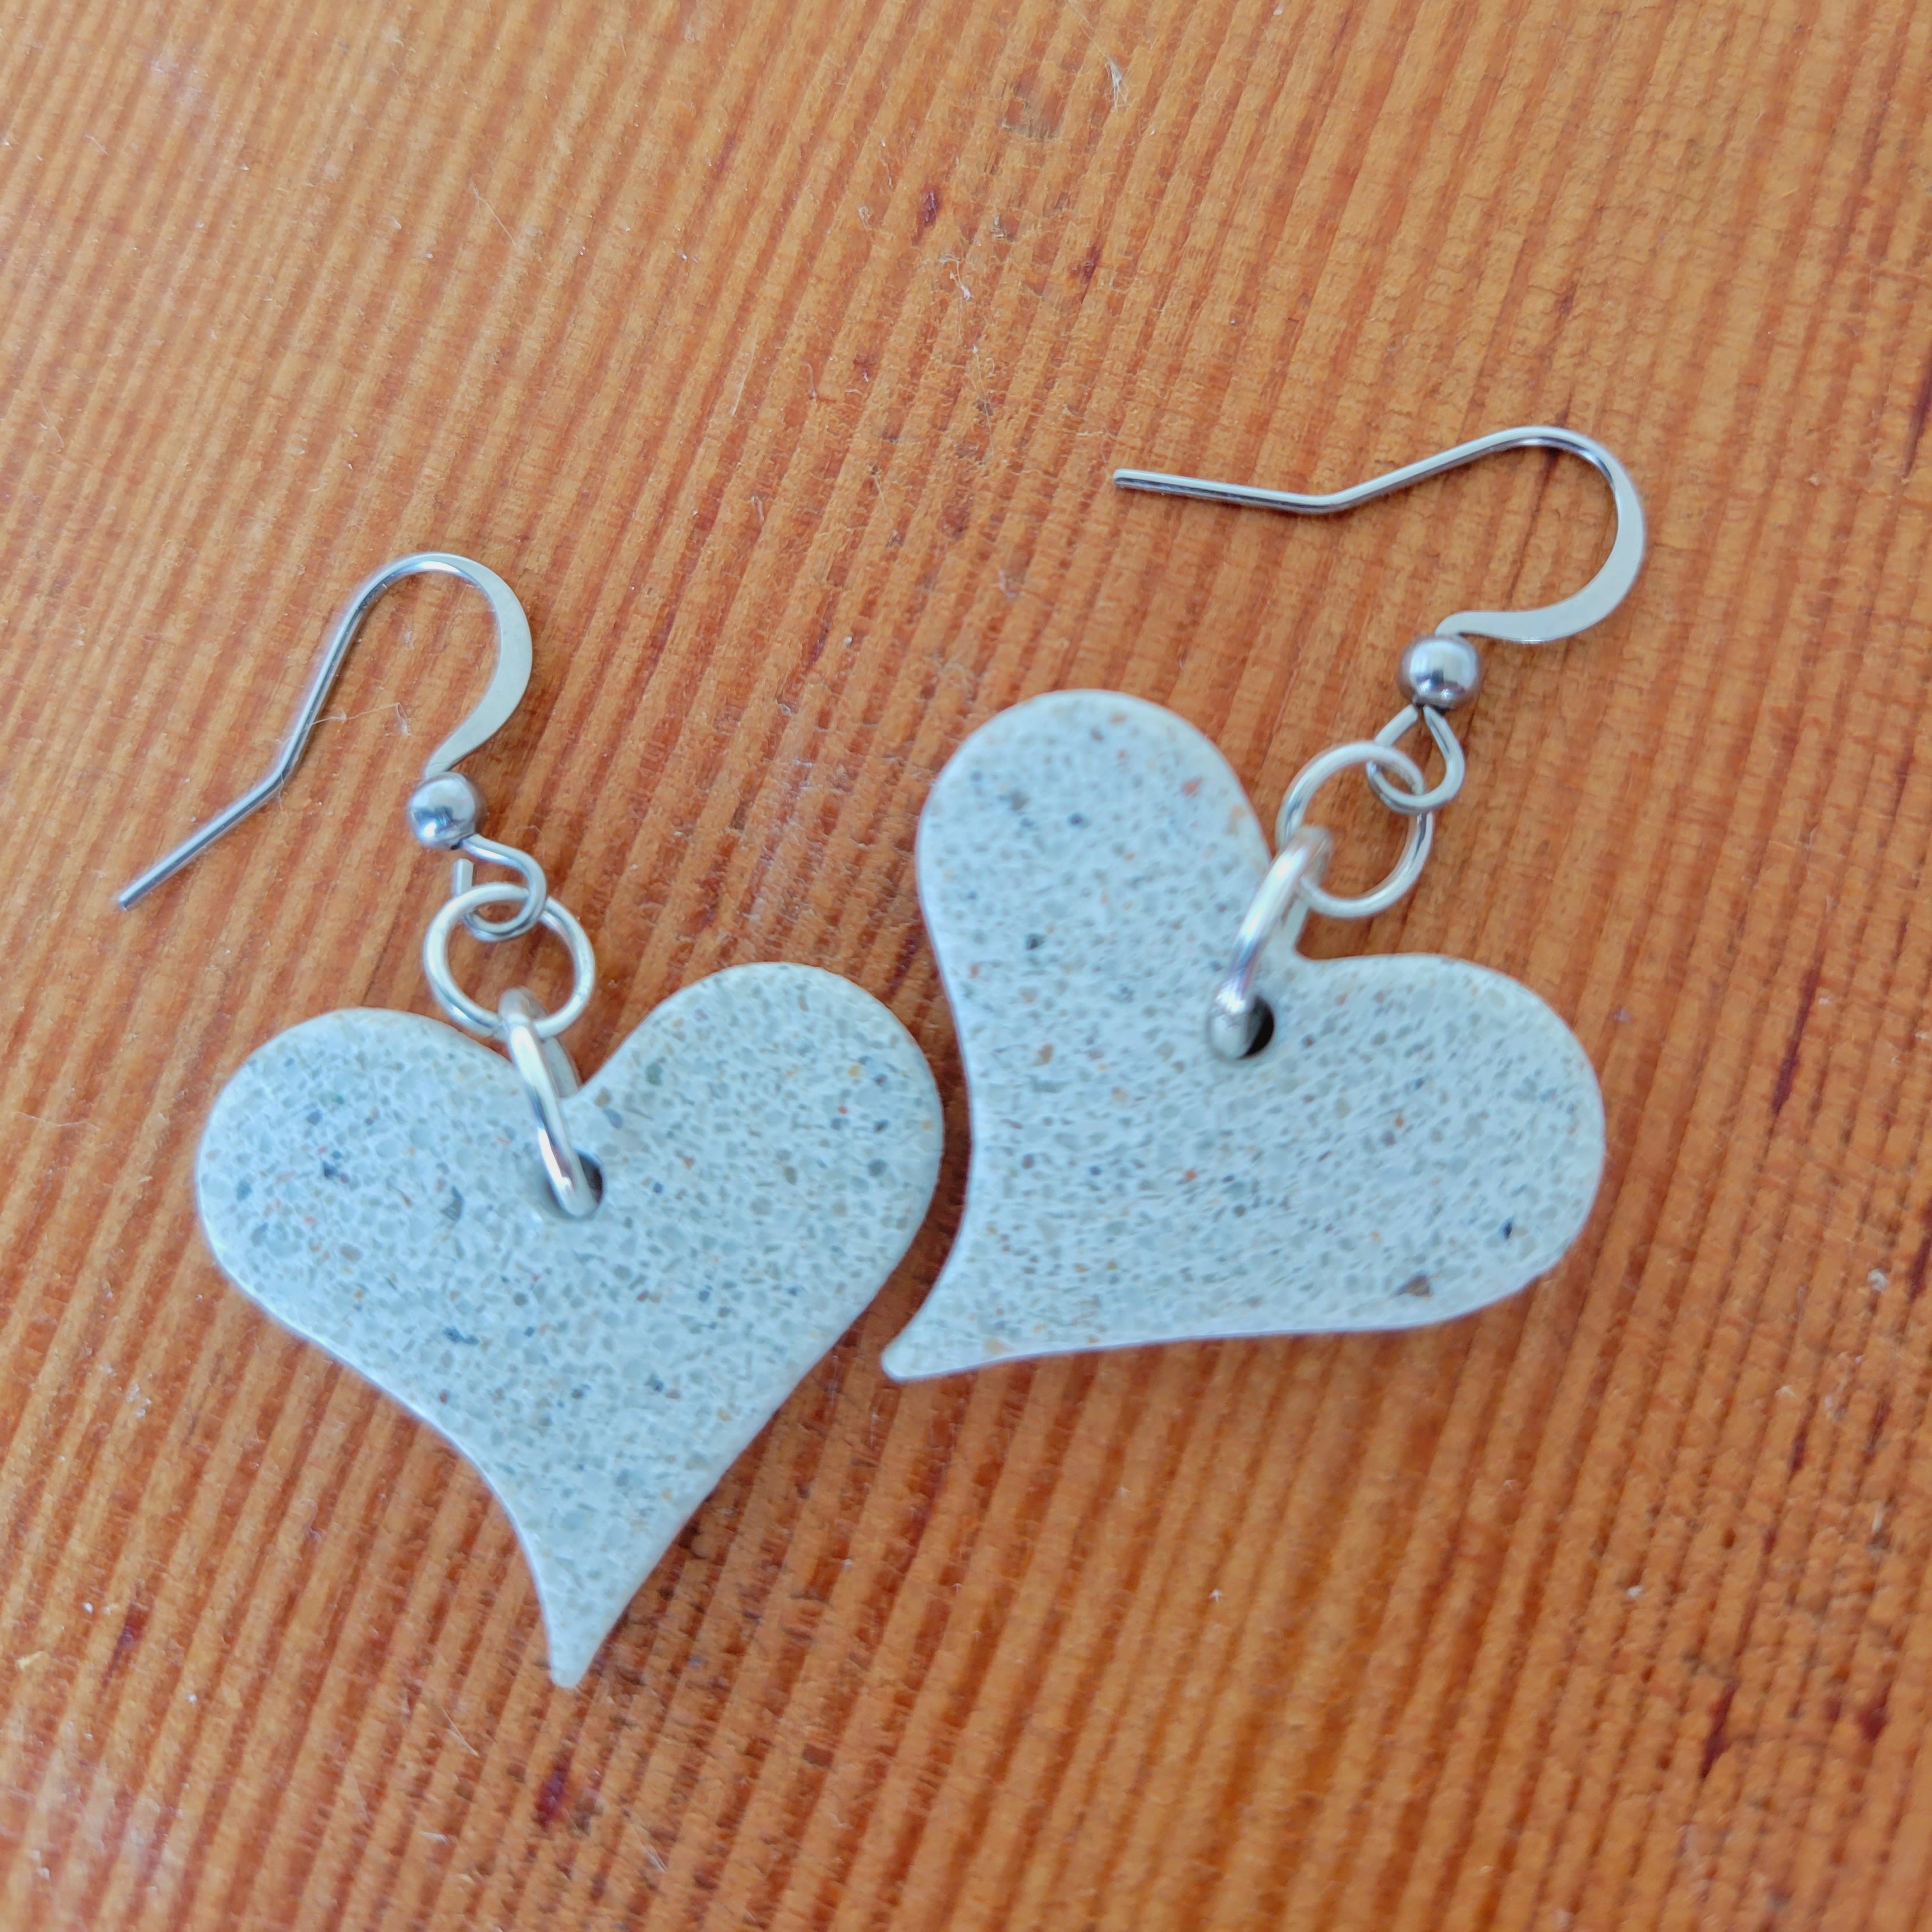 Sparkling White Sandstone Earrings with Pointed Tips, Silver Rings, and 316 Stainless Steel Hooks - Elegant Jewelry Pair